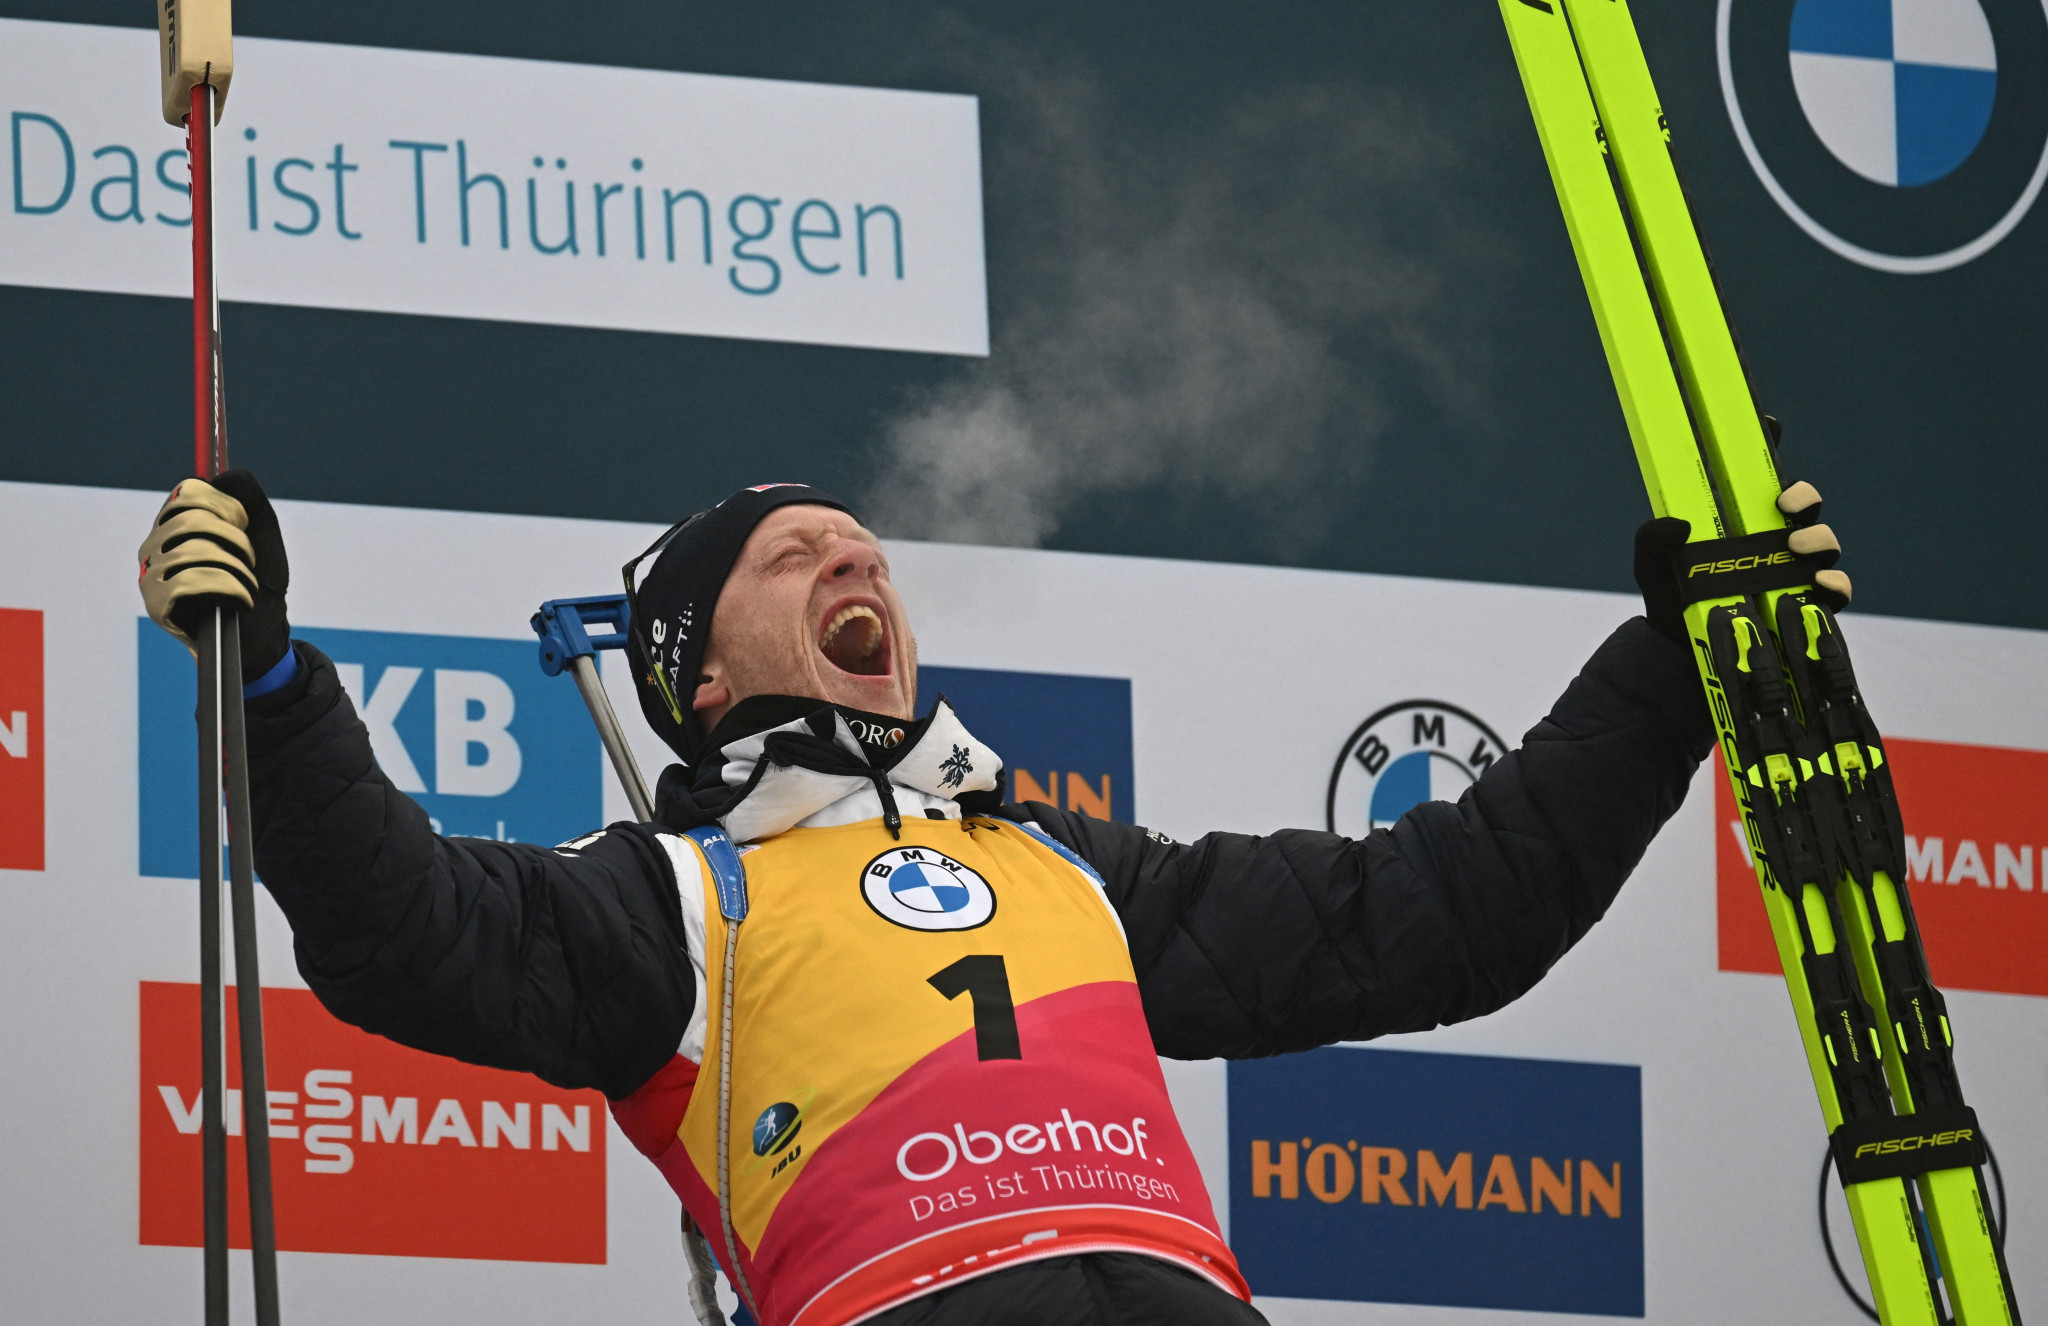 Bø brothers take one-two in men's sprint at IBU World Championships